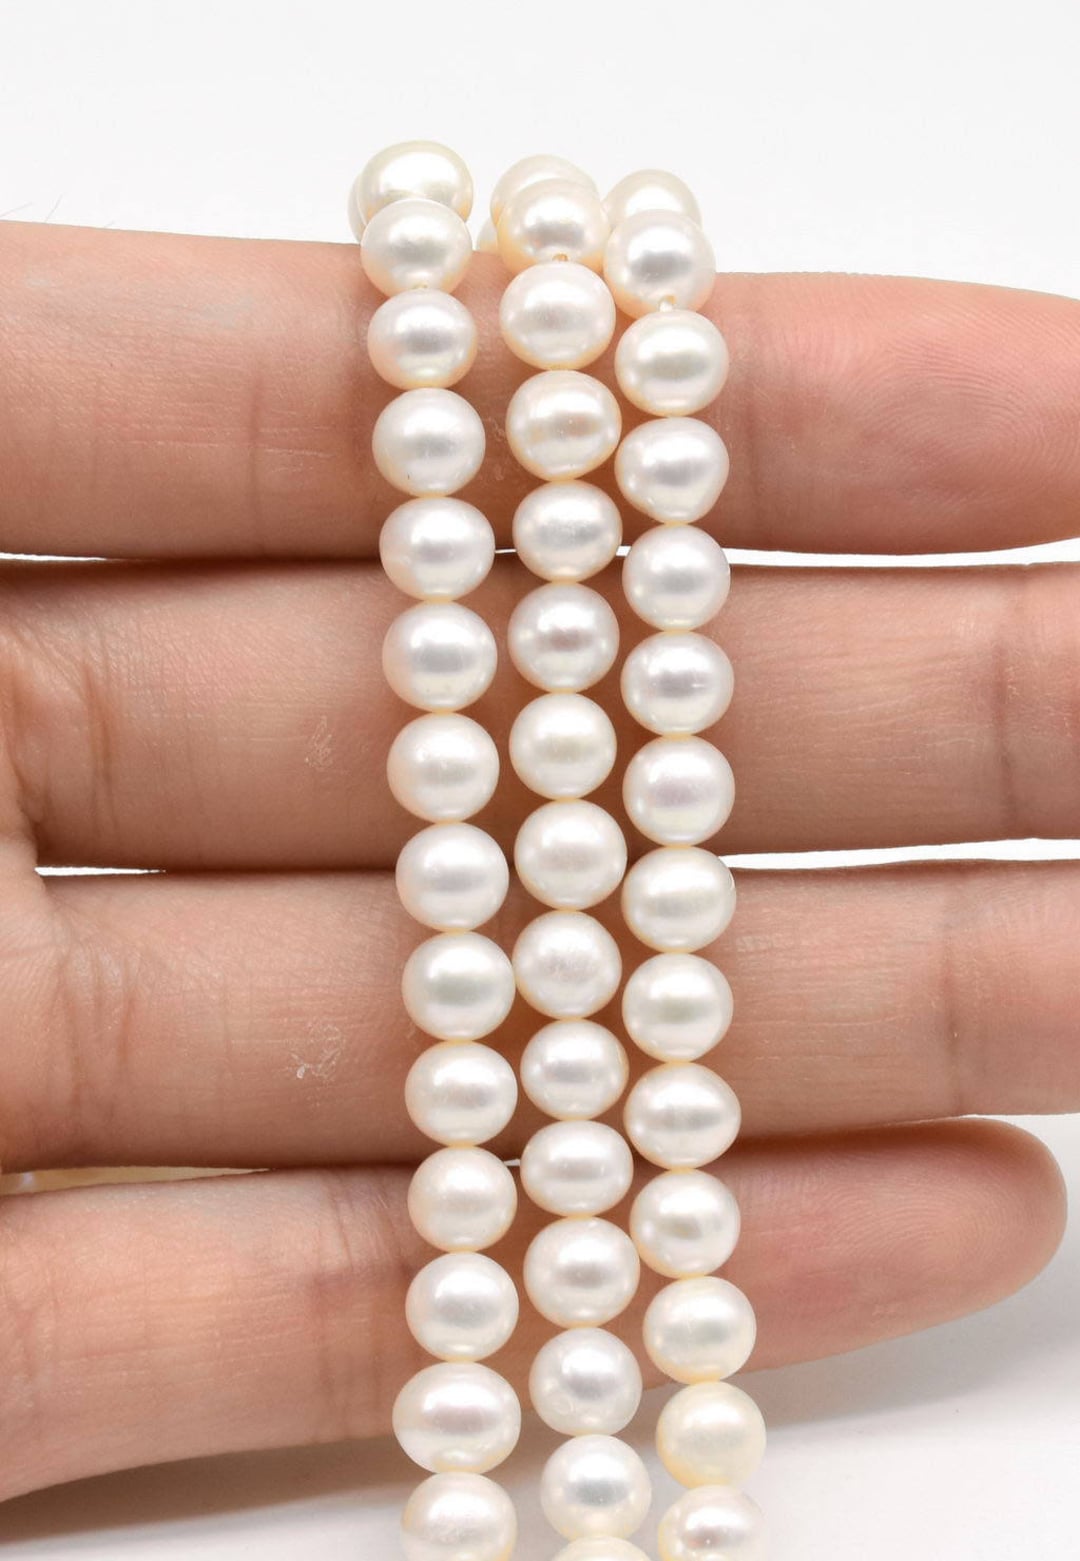 AAA Natural Freshwater Pearl Beads, 4mm 5mm, 6mm, 8mm, 9-10mm,11-12mm Round  Shape Beads, Beautiful Natural White Fresh Water Pearl Bead. 14 